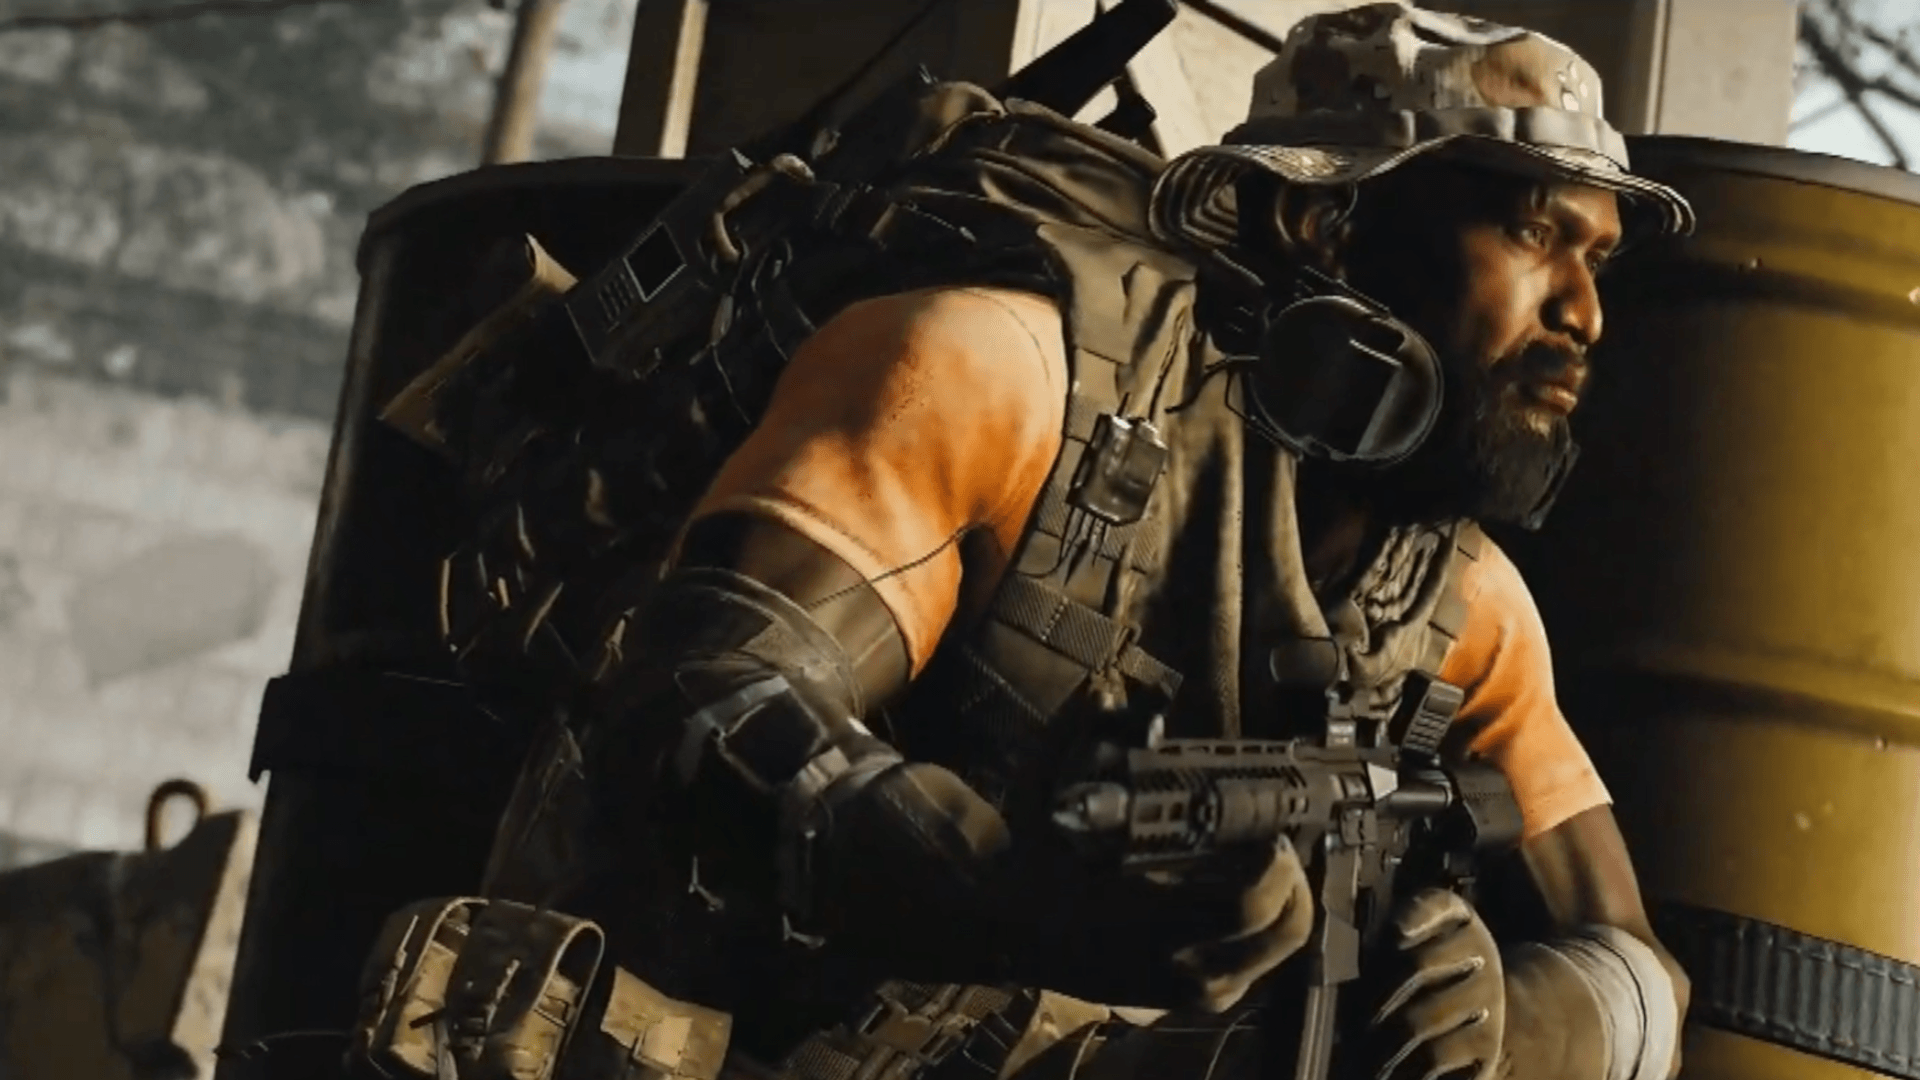 Ghost Recon Breakpoint shows us more Jon Bernthal, and also